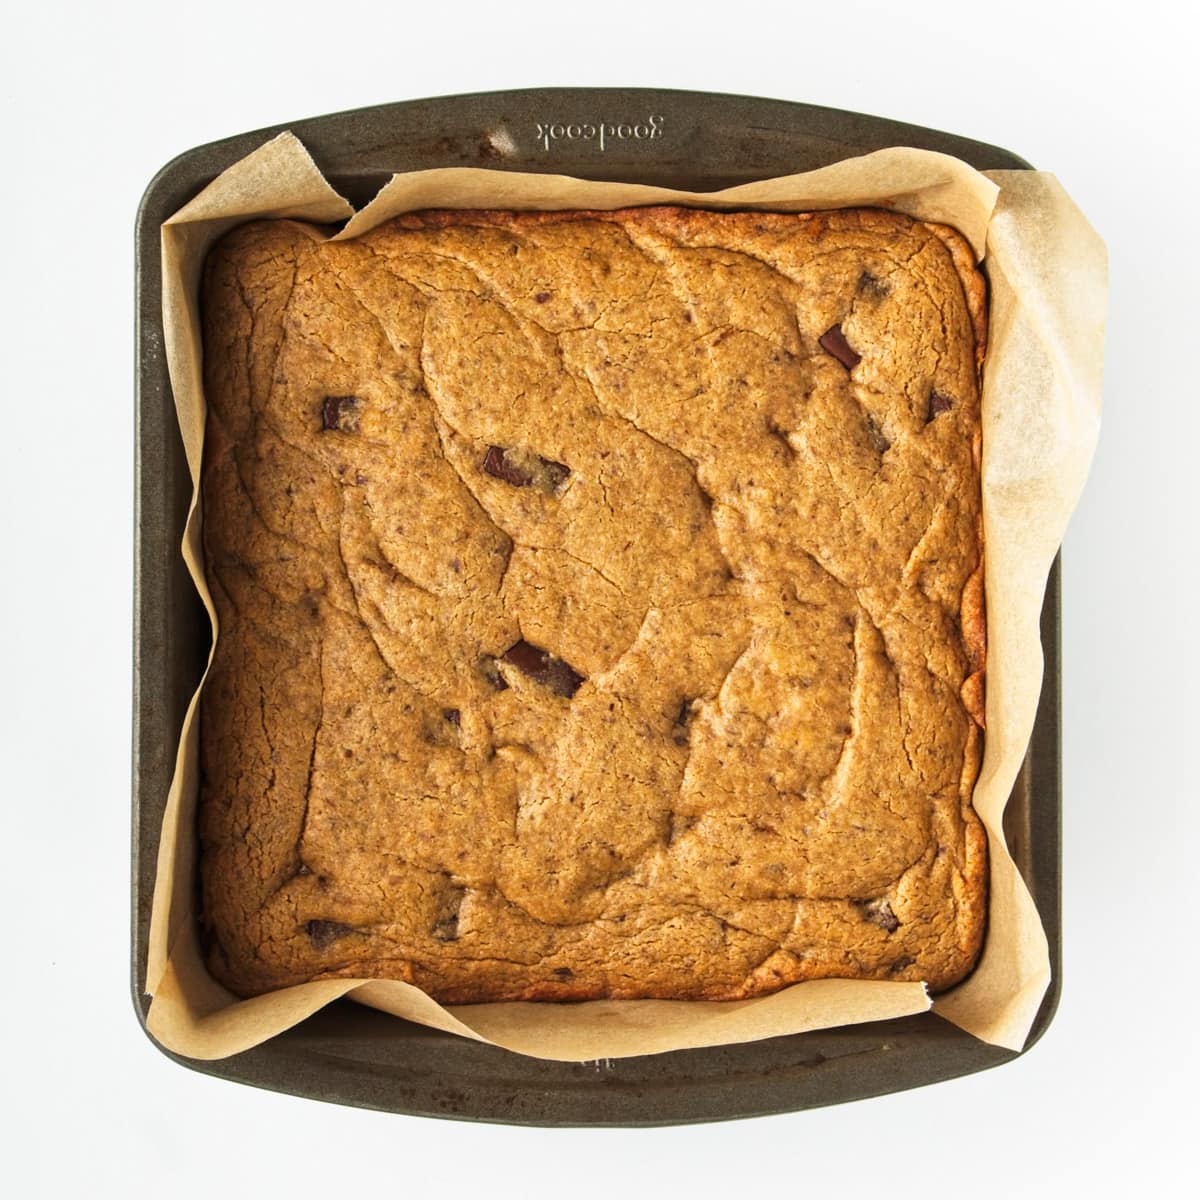 Baked blondies in a lined tin.